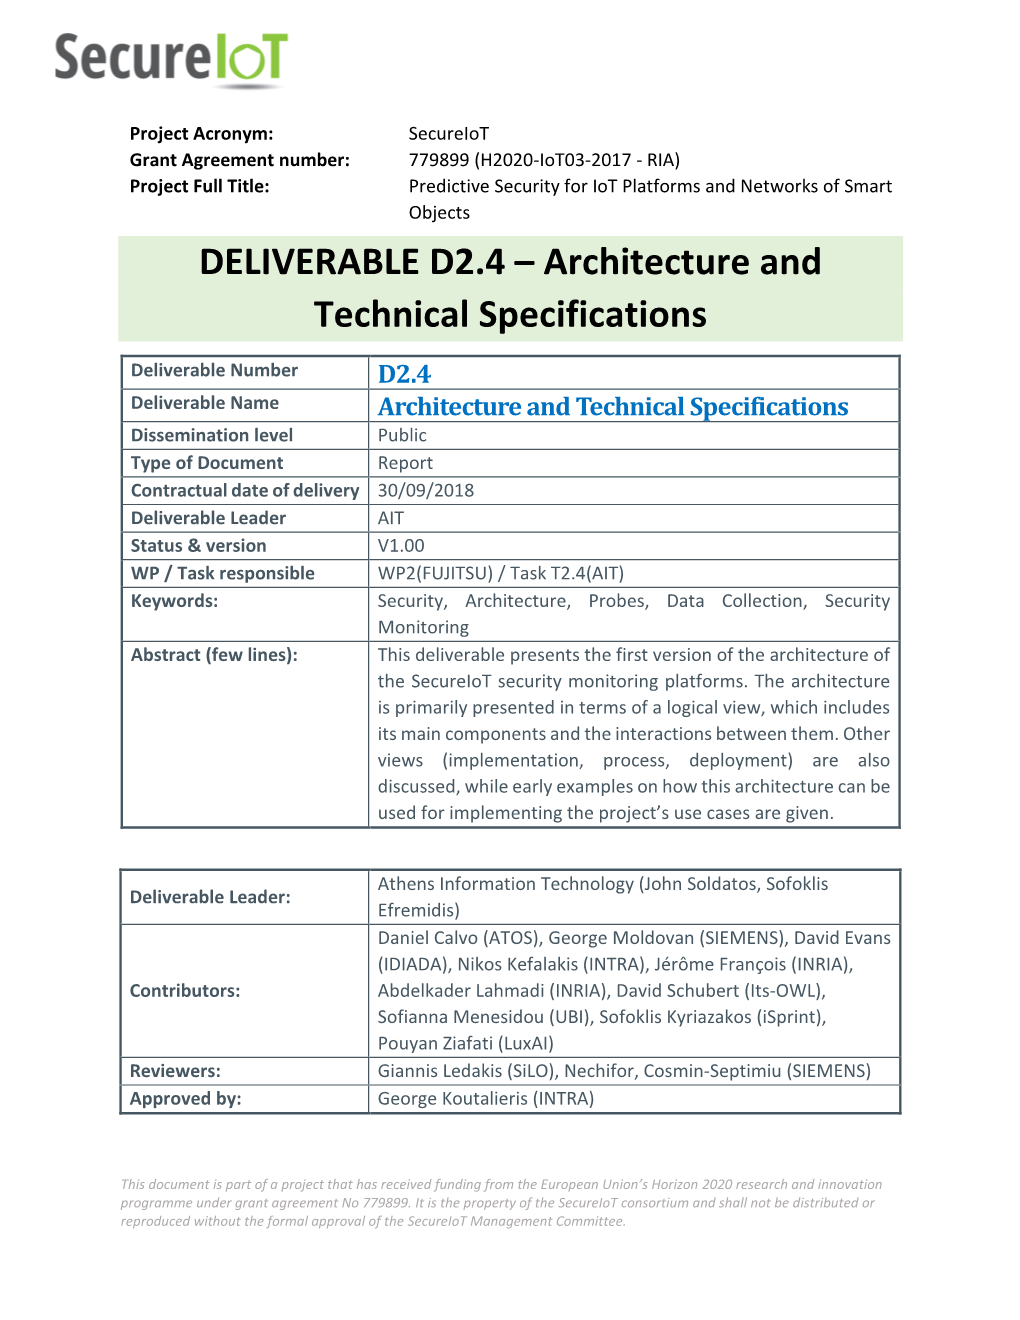 DELIVERABLE D2.4 – Architecture and Technical Specifications